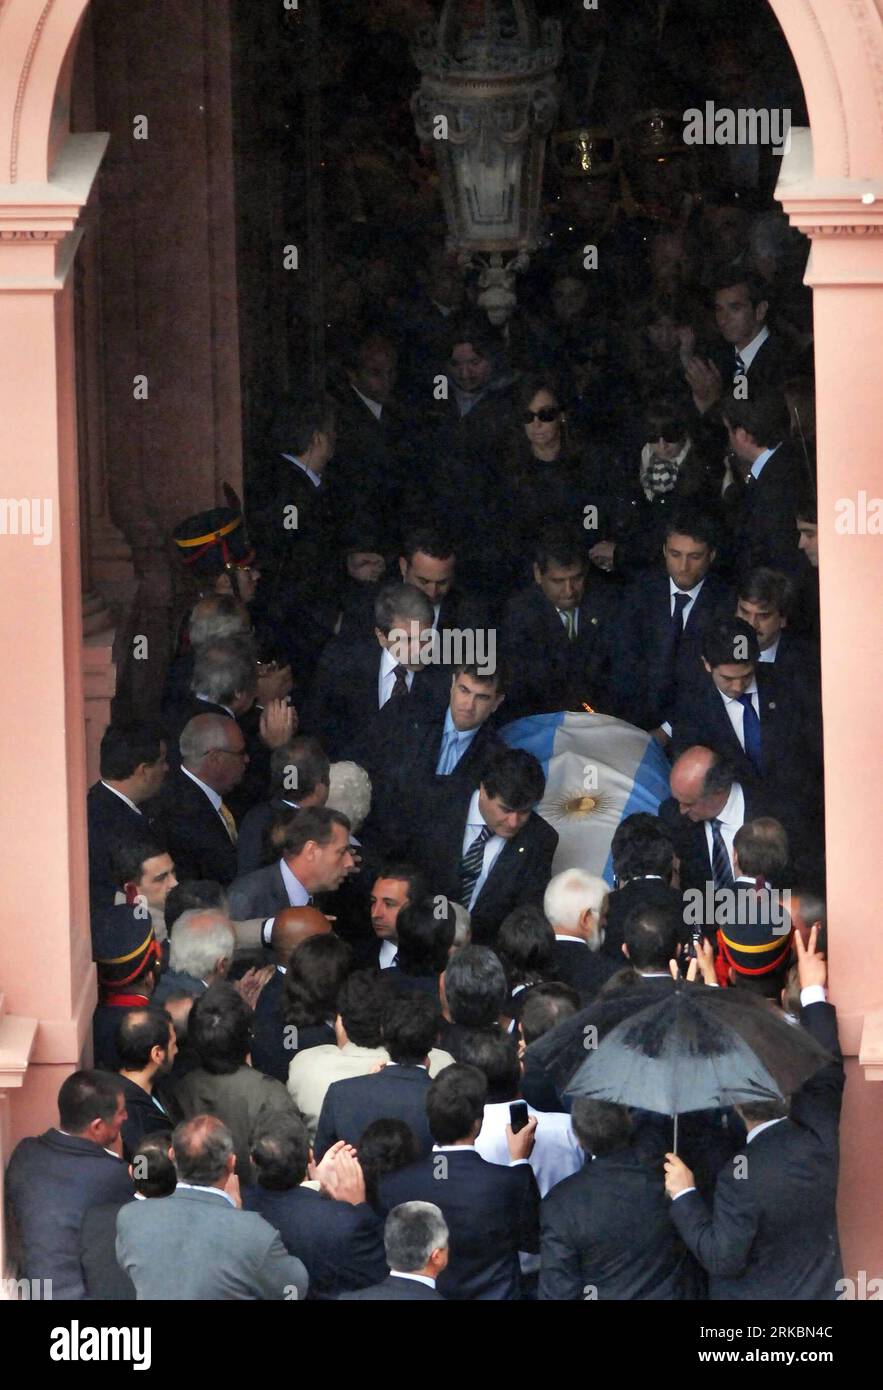 Bildnummer: 54585403  Datum: 29.10.2010  Copyright: imago/Xinhua (101029) --  BUENOS AIRES, Oct. 29, 2010 (Xinhua) --  The coffin of former Argentine President Nestor Kirchner is carried onto the hearse which will carry his remains from the Casa Rosada Presidential Palace to a local airport for a flight to his home El Calafate, province of Santa Cruz, where he will be buried in his family cemetery, Oct. 29, 2010. (Xinhua/Leonardo Zavattaro/Telam) ARGENTINA-BUENOS AIRES-KIRCHNER-FUNERAL PUBLICATIONxNOTxINxCHN People Politik Beerdigung Trauer Kirchner premiumd kbdig xcb 2010 hoch o0 Sarg    Bild Stock Photo